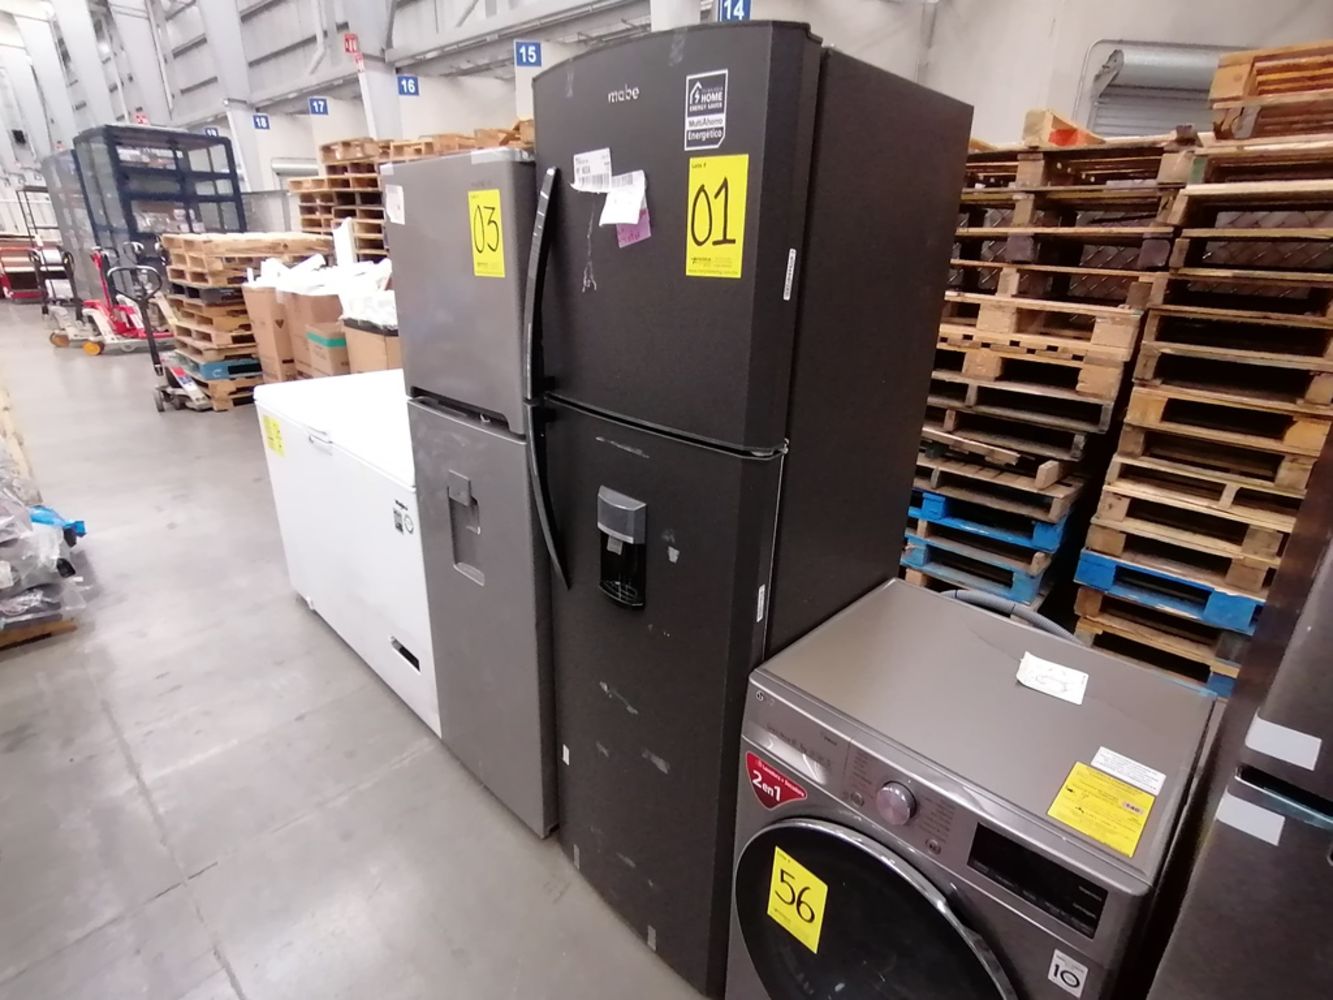 Walmart and Ecommerce Auction - Refrigerators, Freezers, Cooktops, Ovens, Stovetops, Furniture, Mattresses, Washers & Dryers